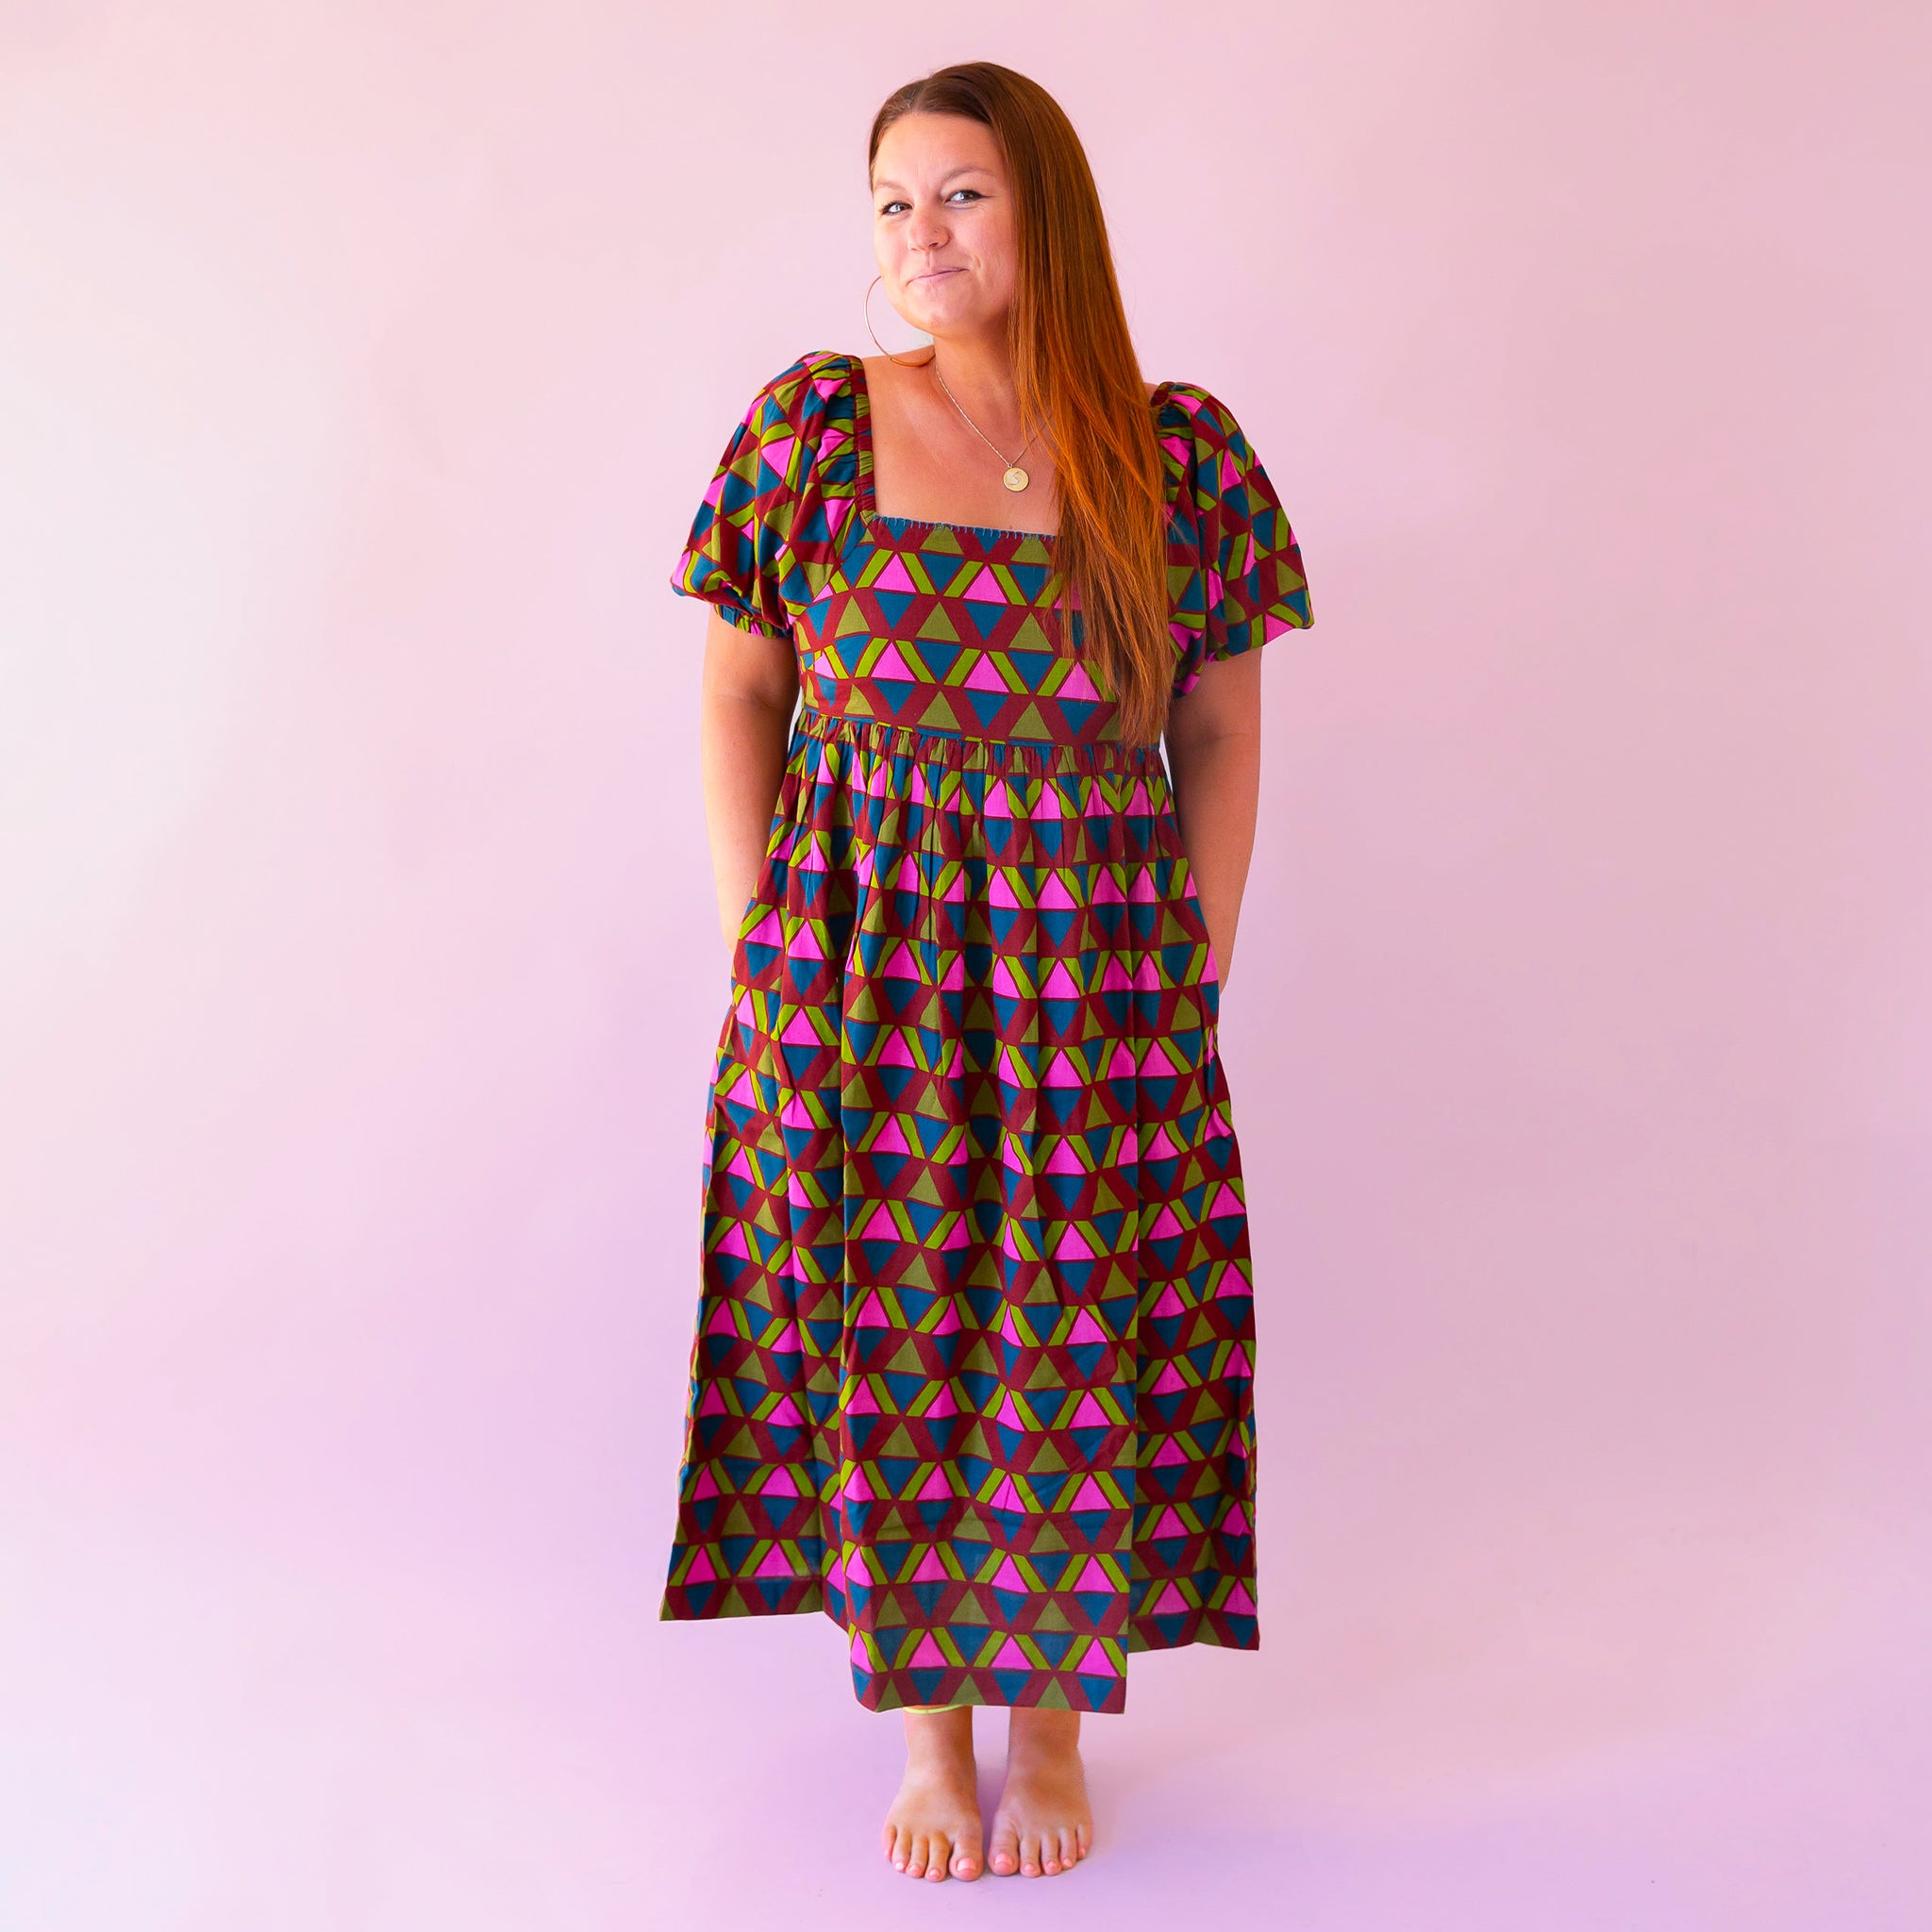 A pink, green, teal and red triangle patterned maxi dress with a square neckline, pockets and puff sleeves.